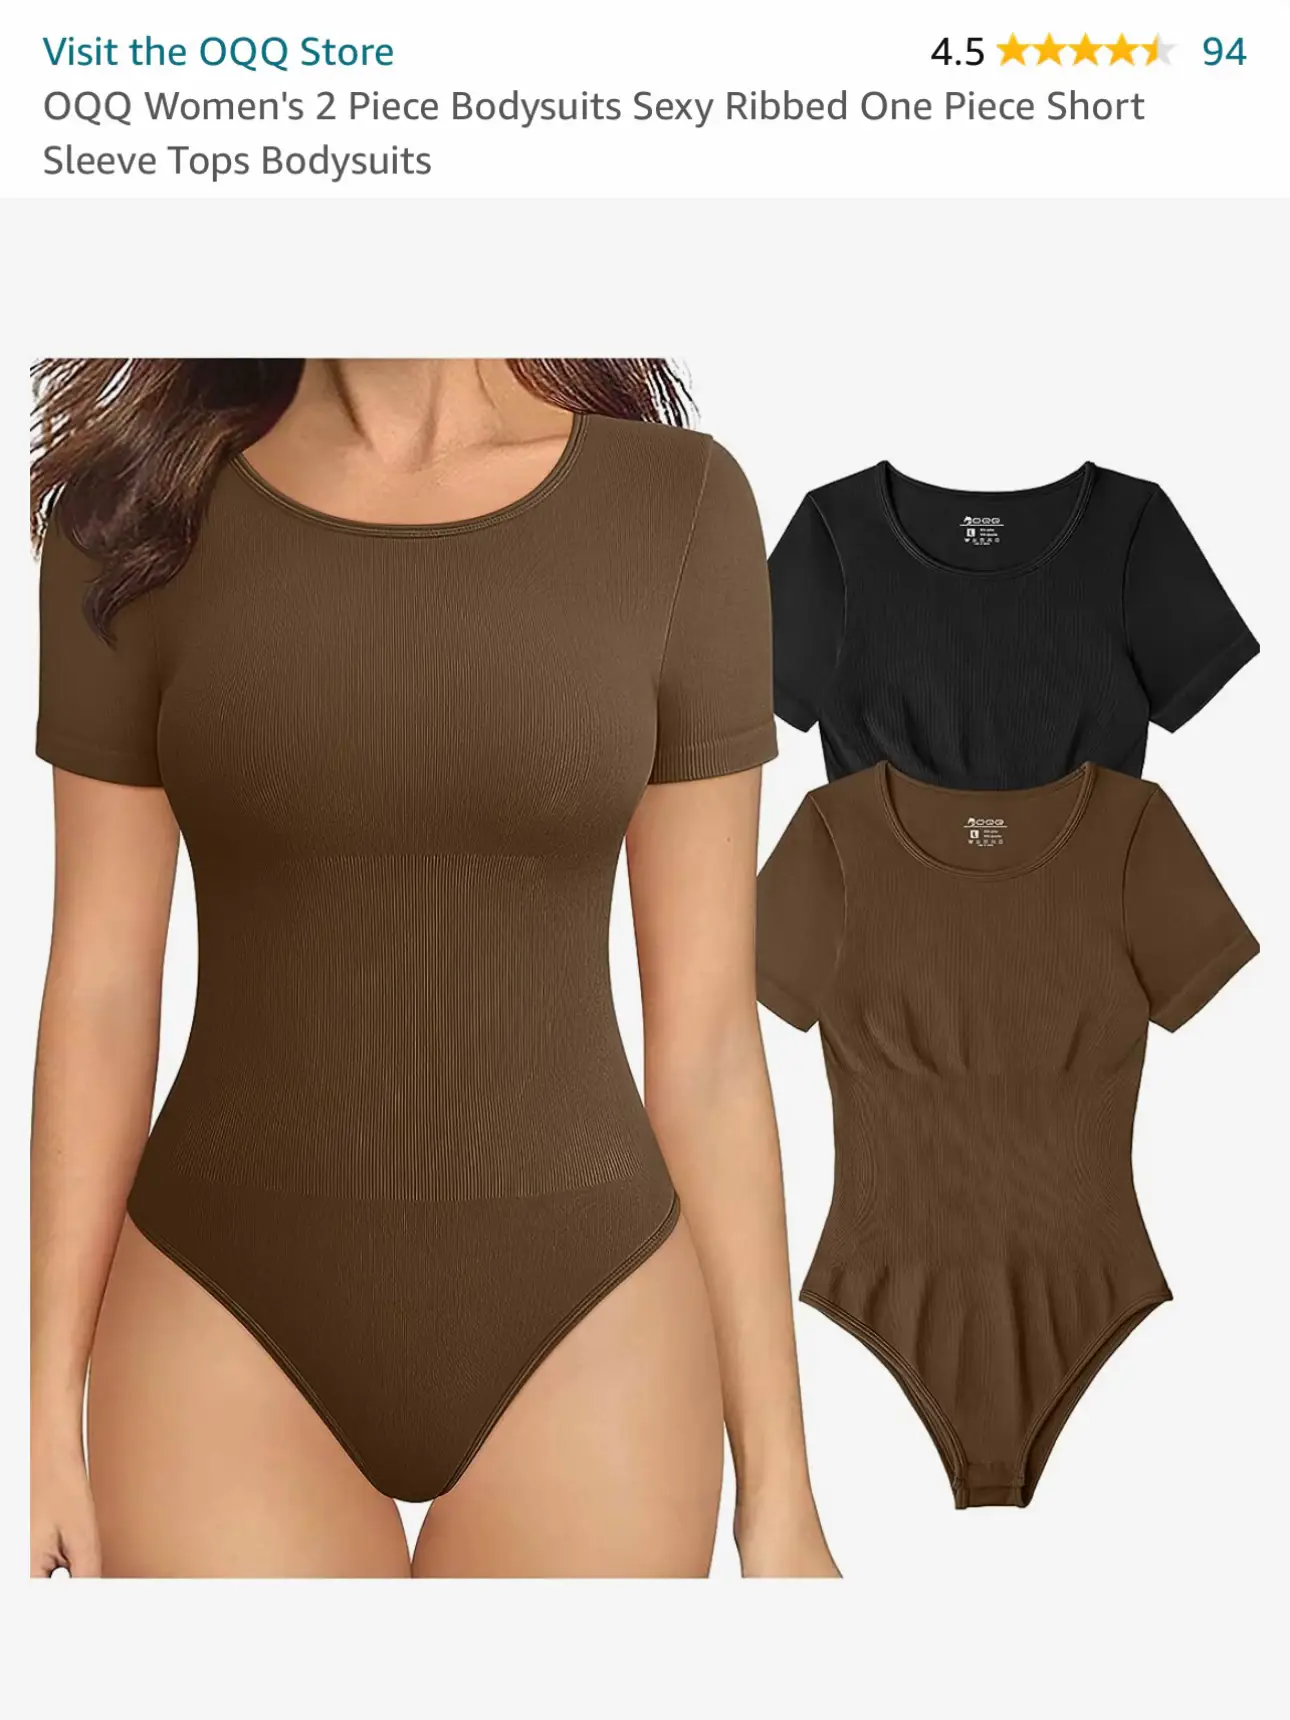 OQQ Women's 2 Piece Bodysuits Sexy Ribbed Long Sleeve Round Neck Cutout  Front Tops Bodysuits Black Beige at  Women's Clothing store